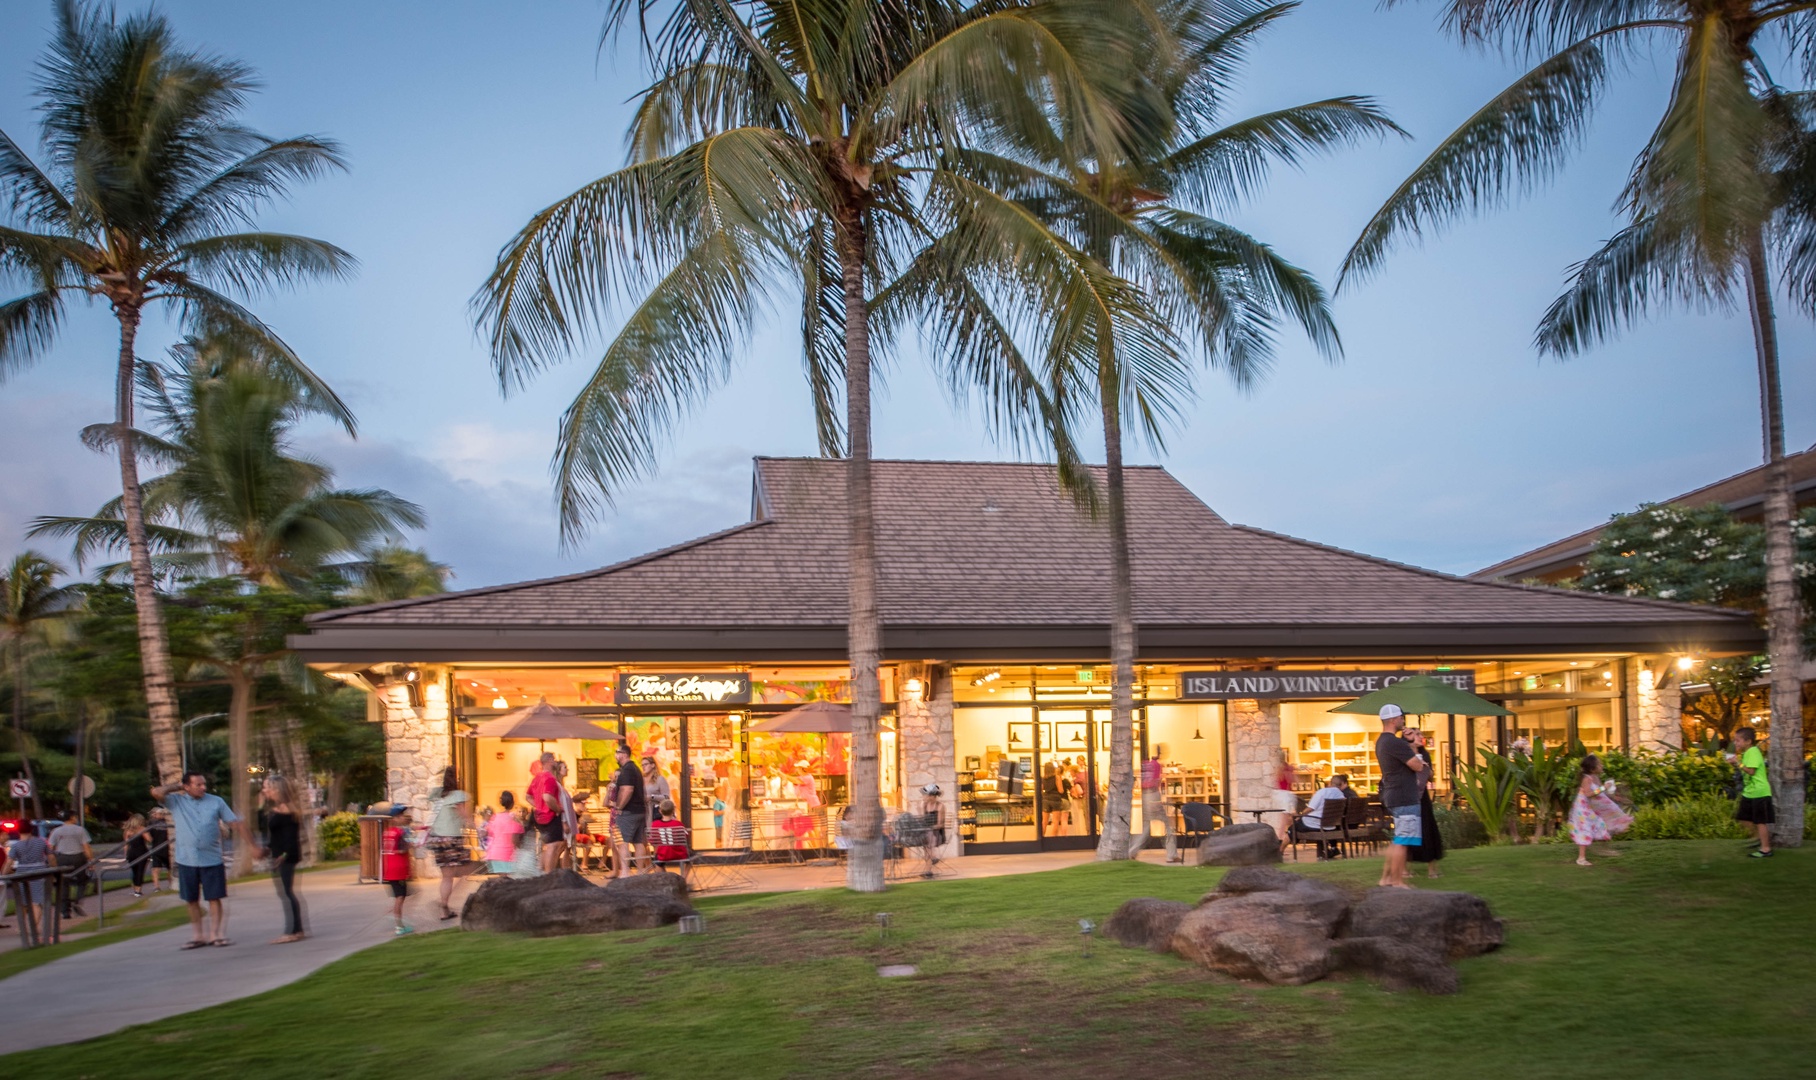 Kapolei Vacation Rentals, Kai Lani 16C - Treat yourself to ice cream or coffee at the shops.